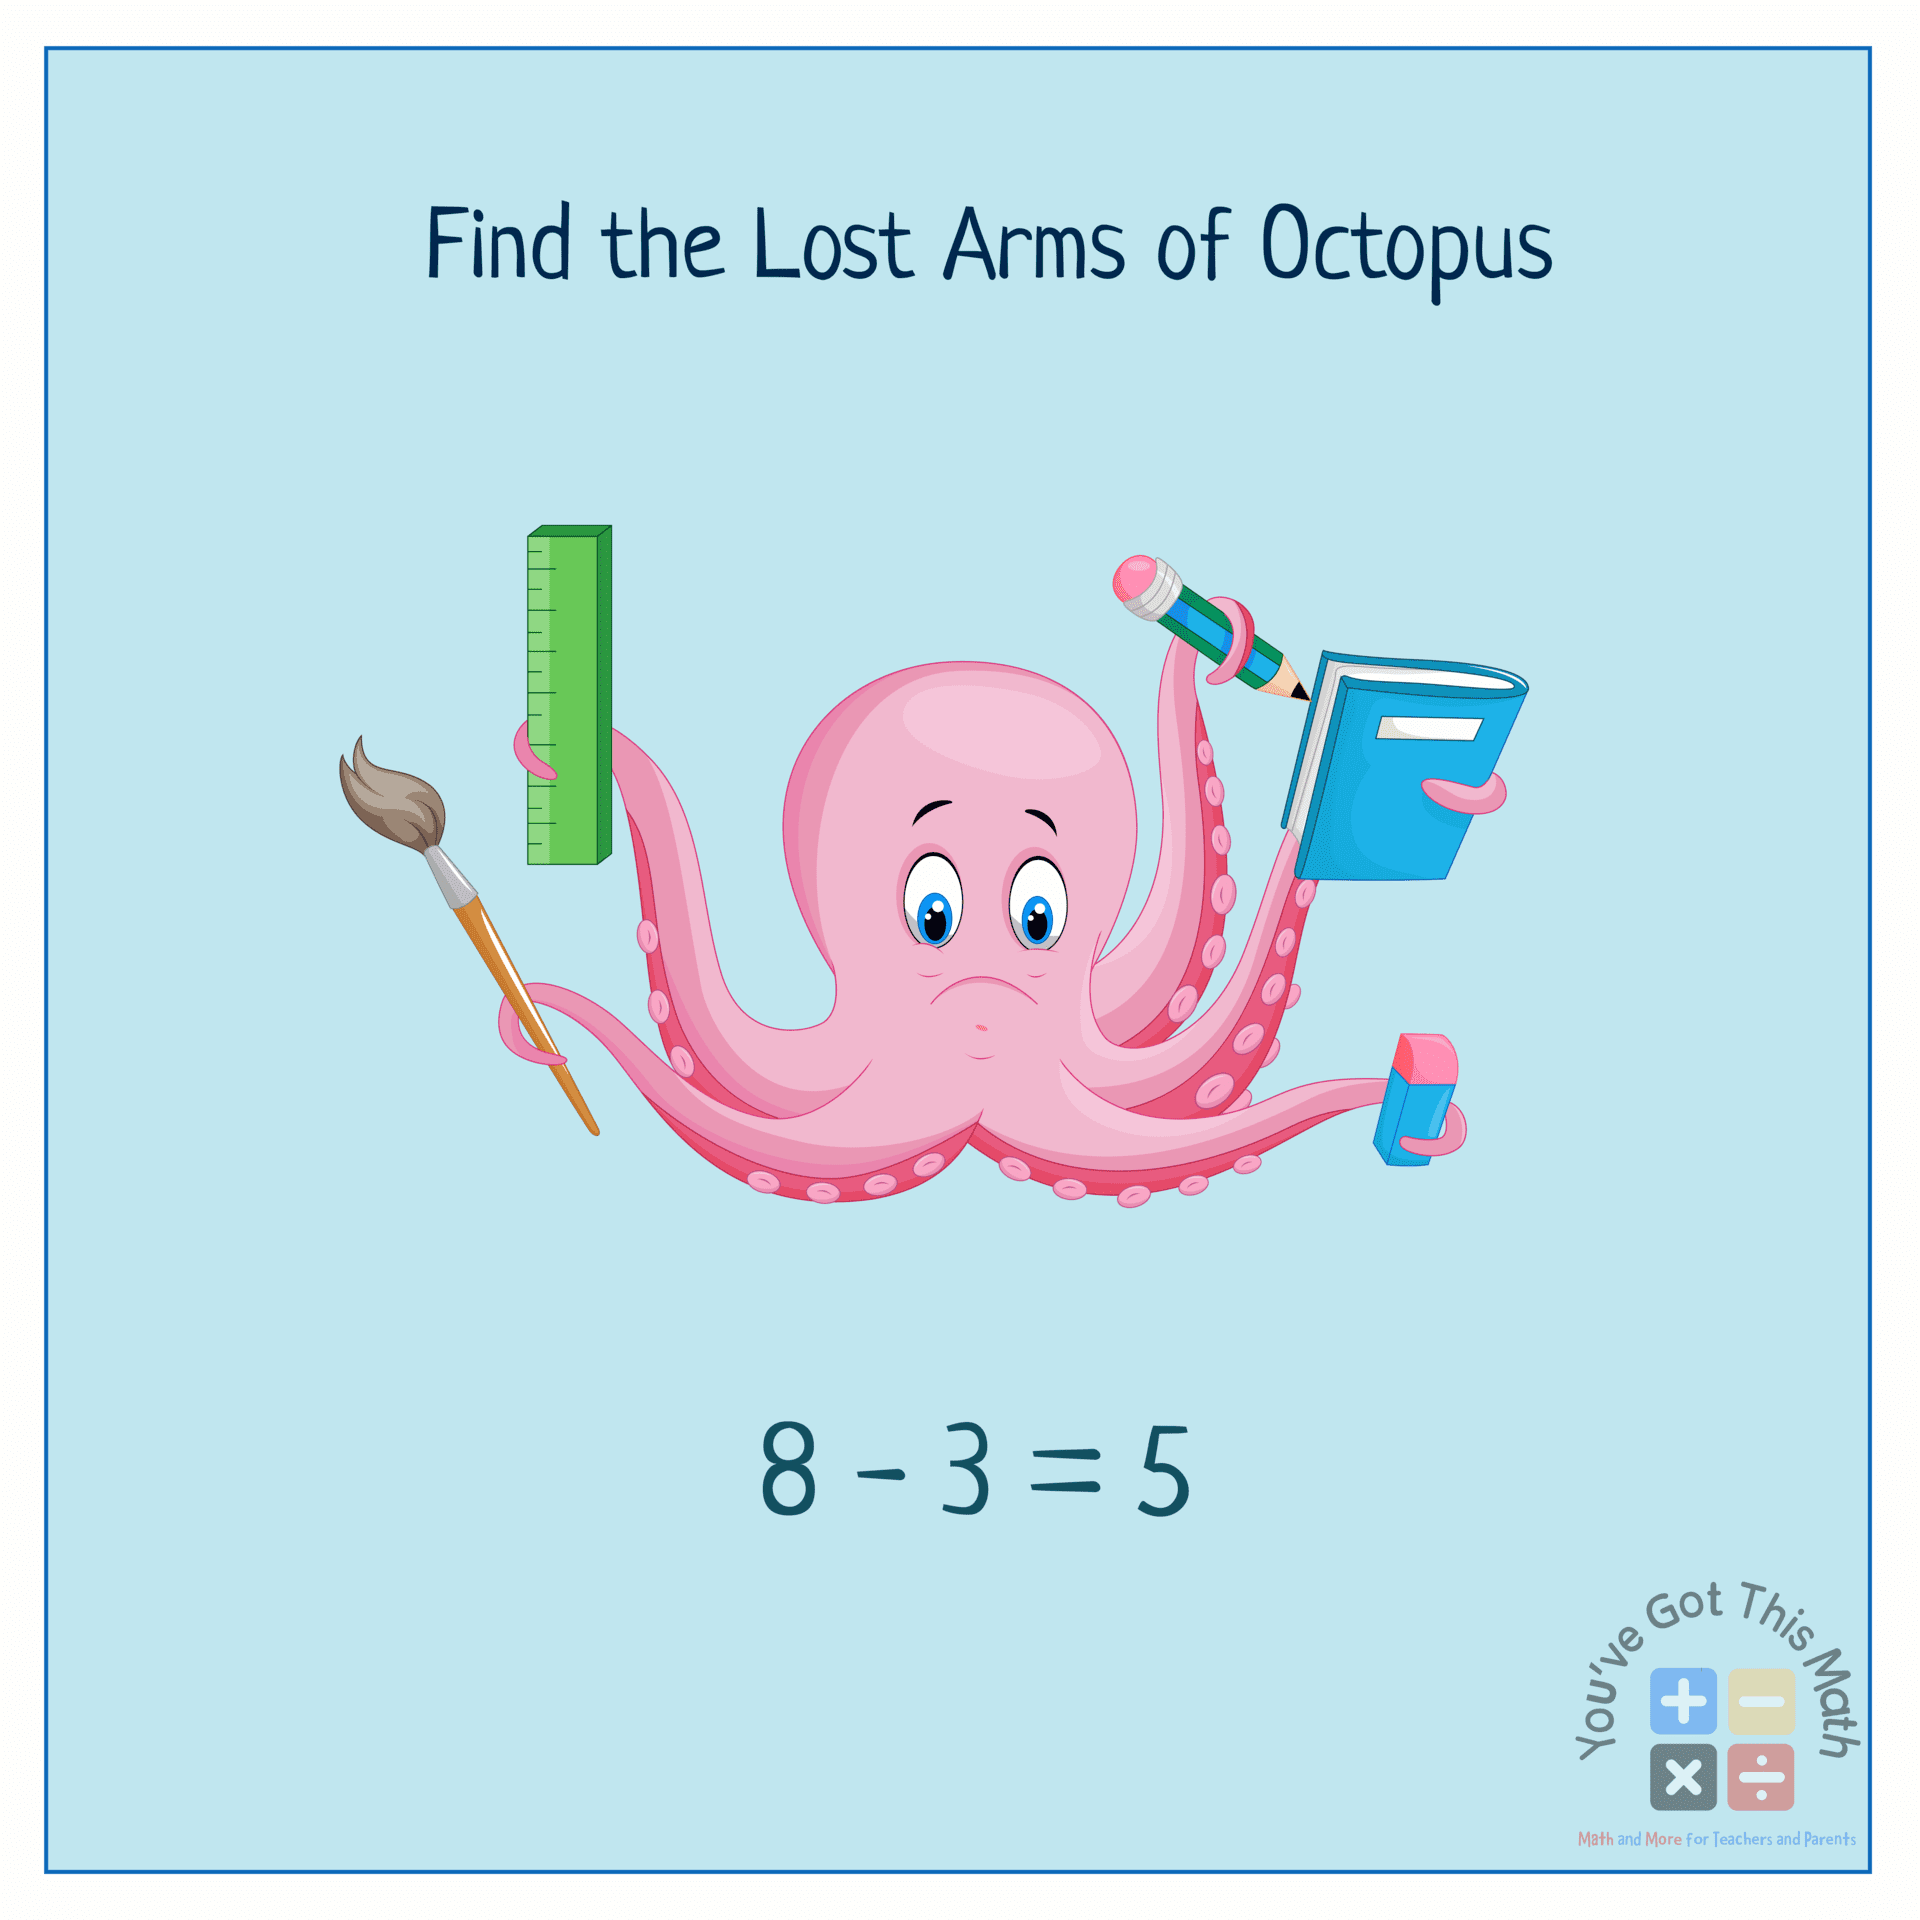 Finding the lost arm of octopus by subtraction